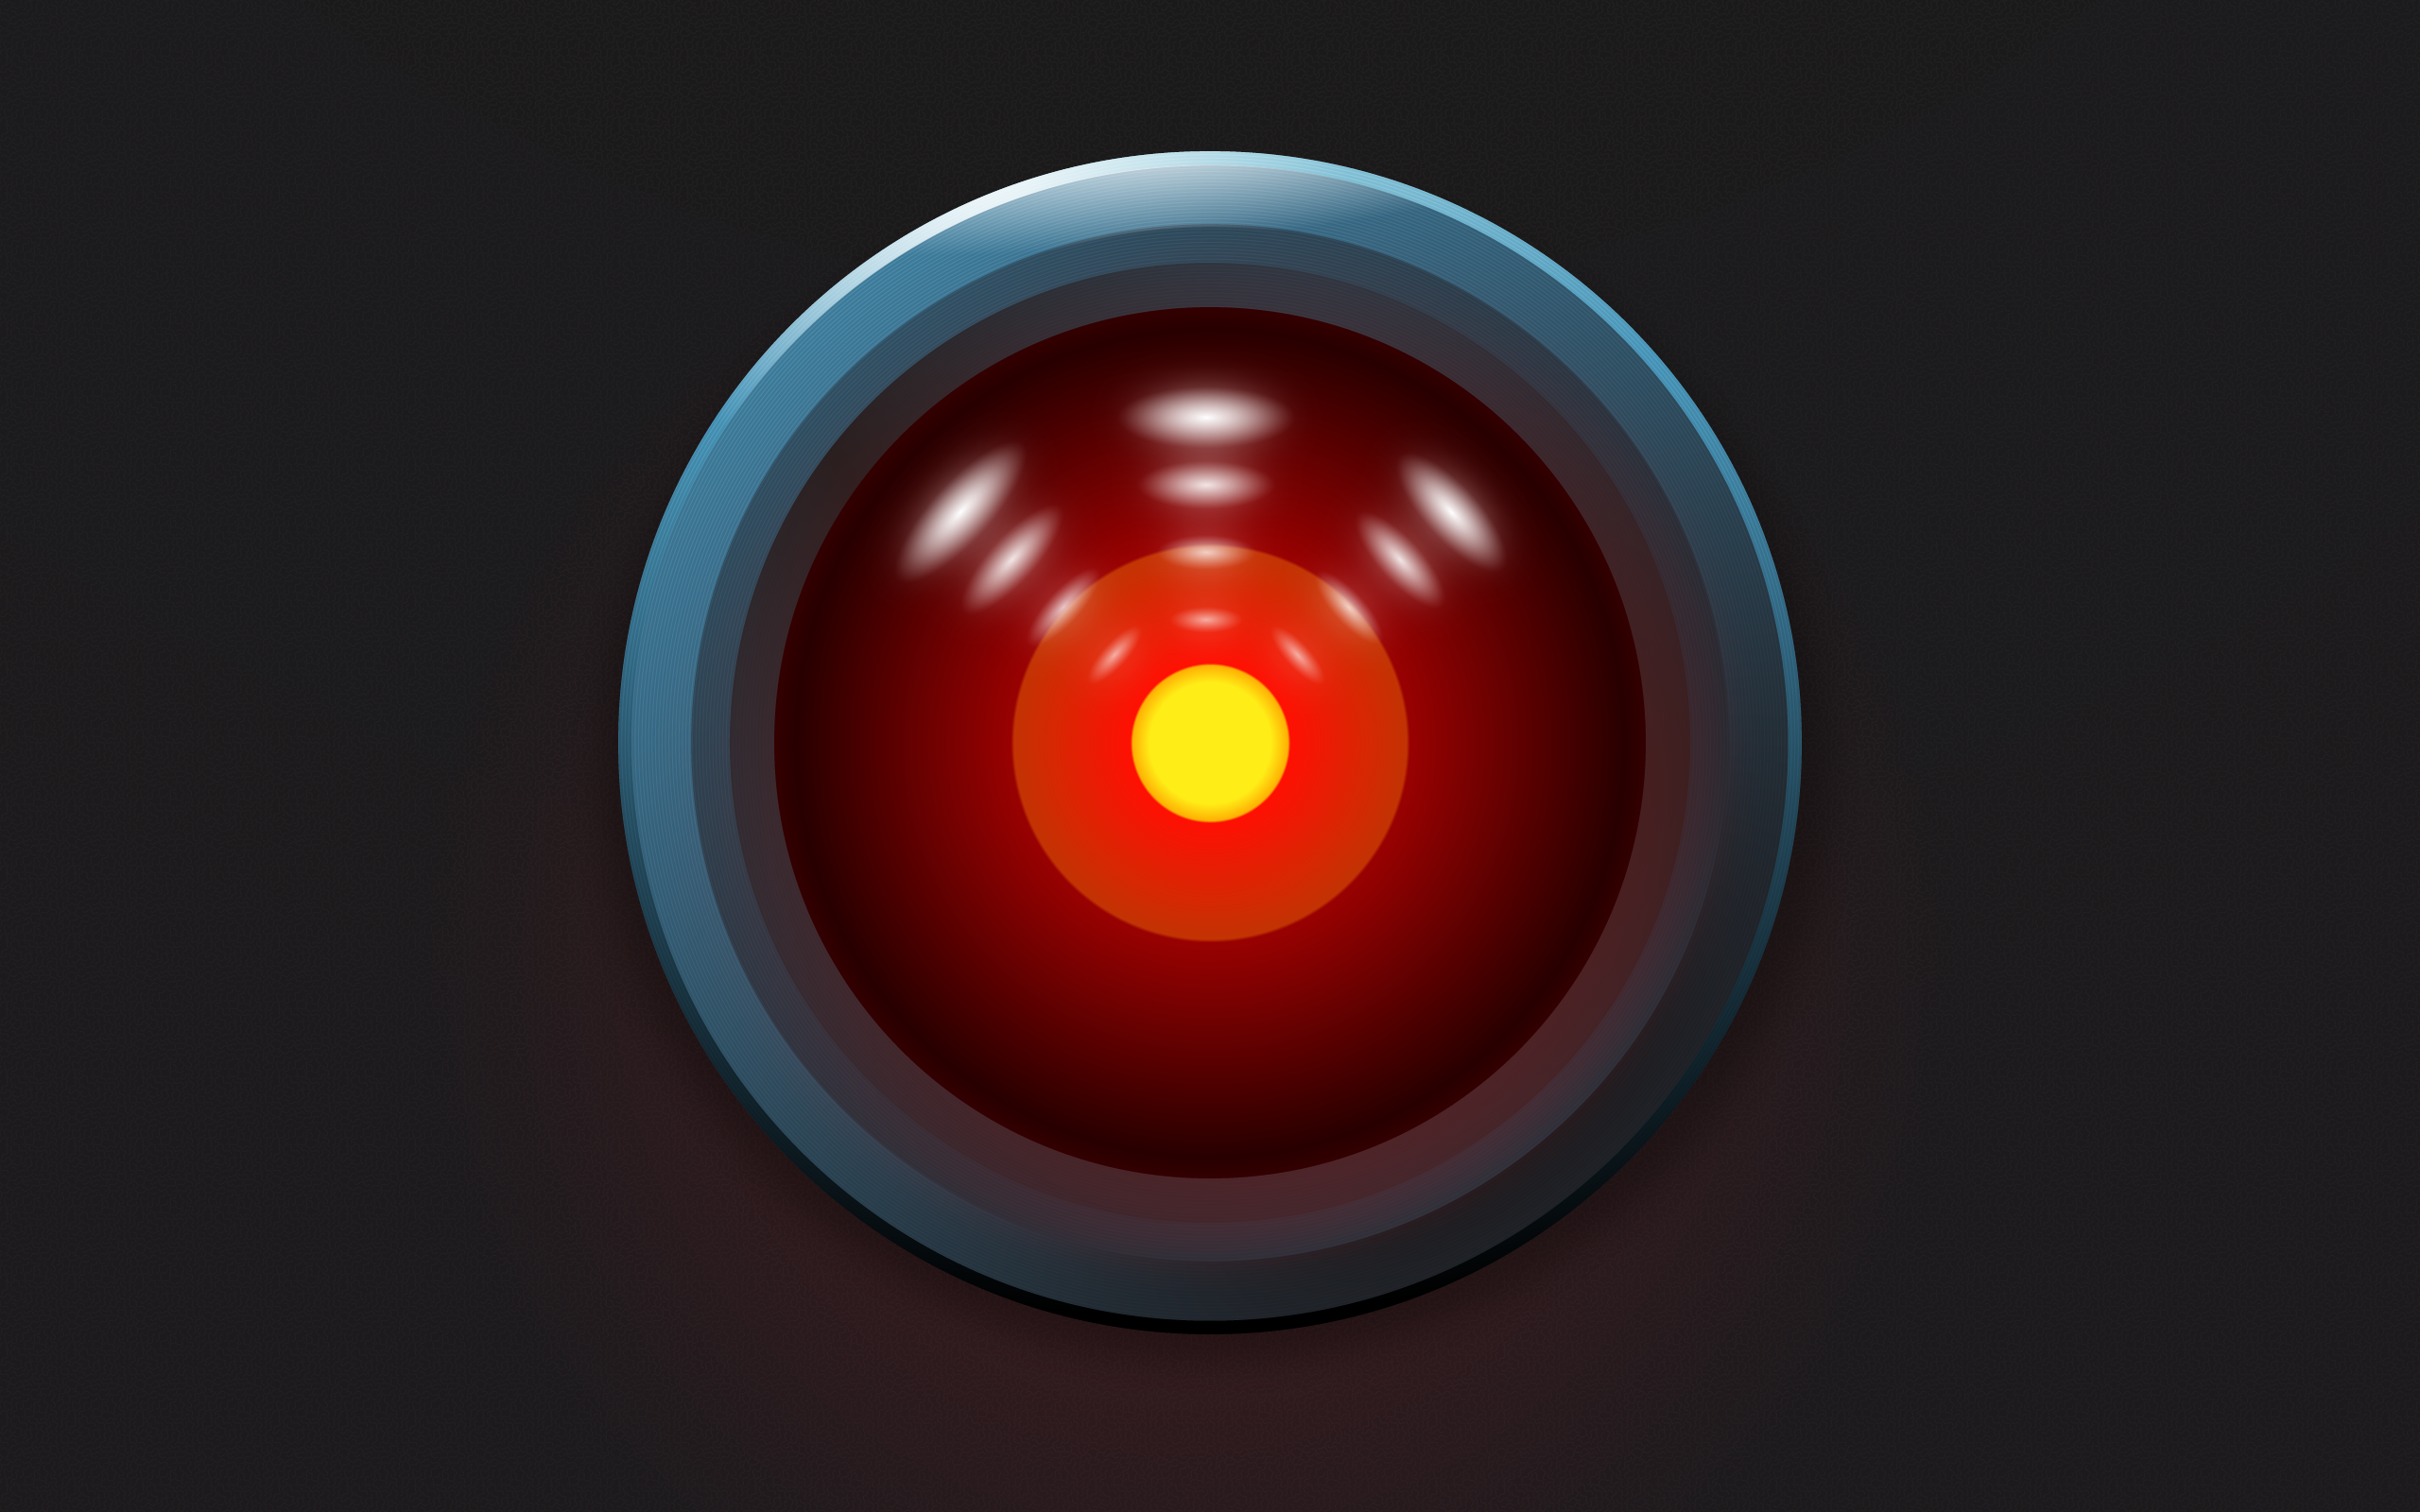 hal 9000 pictures